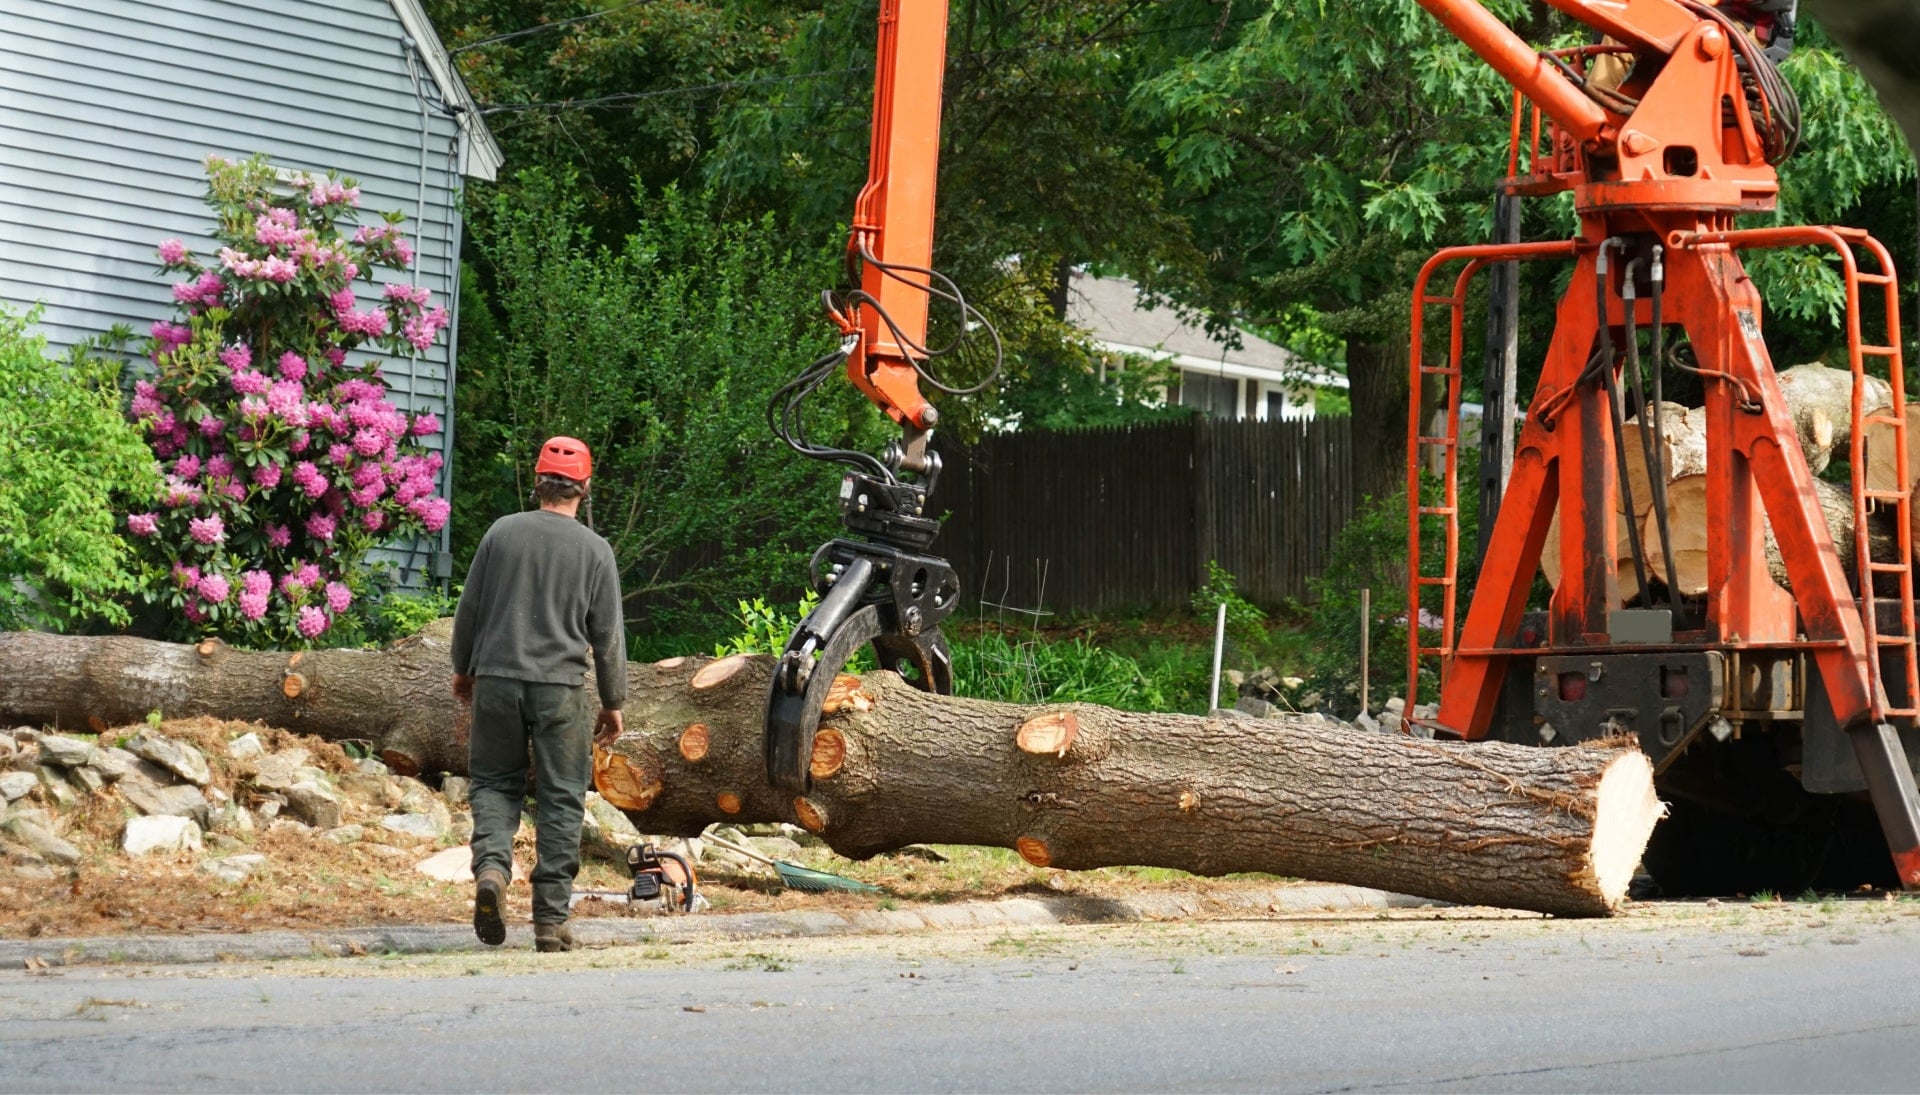 Heavy machinery is used to remove a tree after cutting in a Attleboro, MA yard.